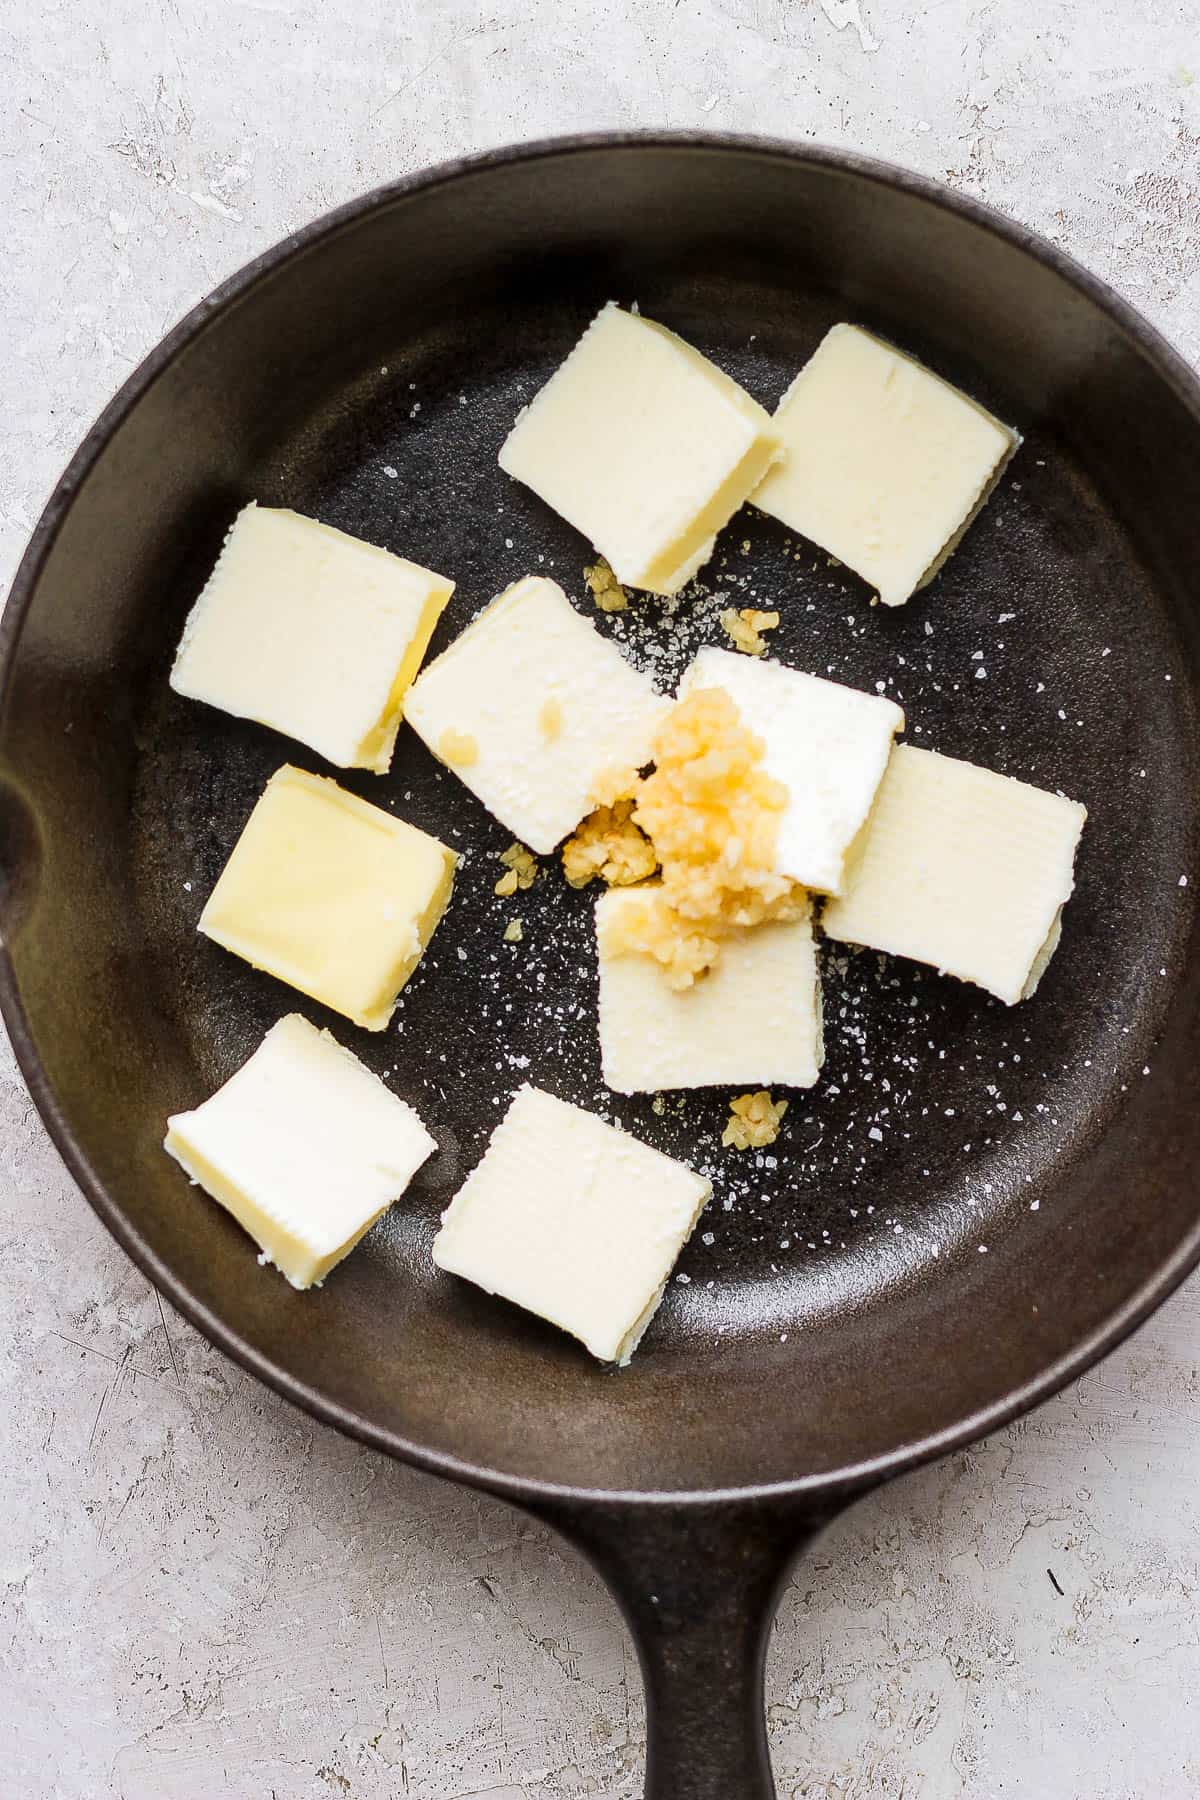 Smoked butter ingredients in a large cast iron skillet.